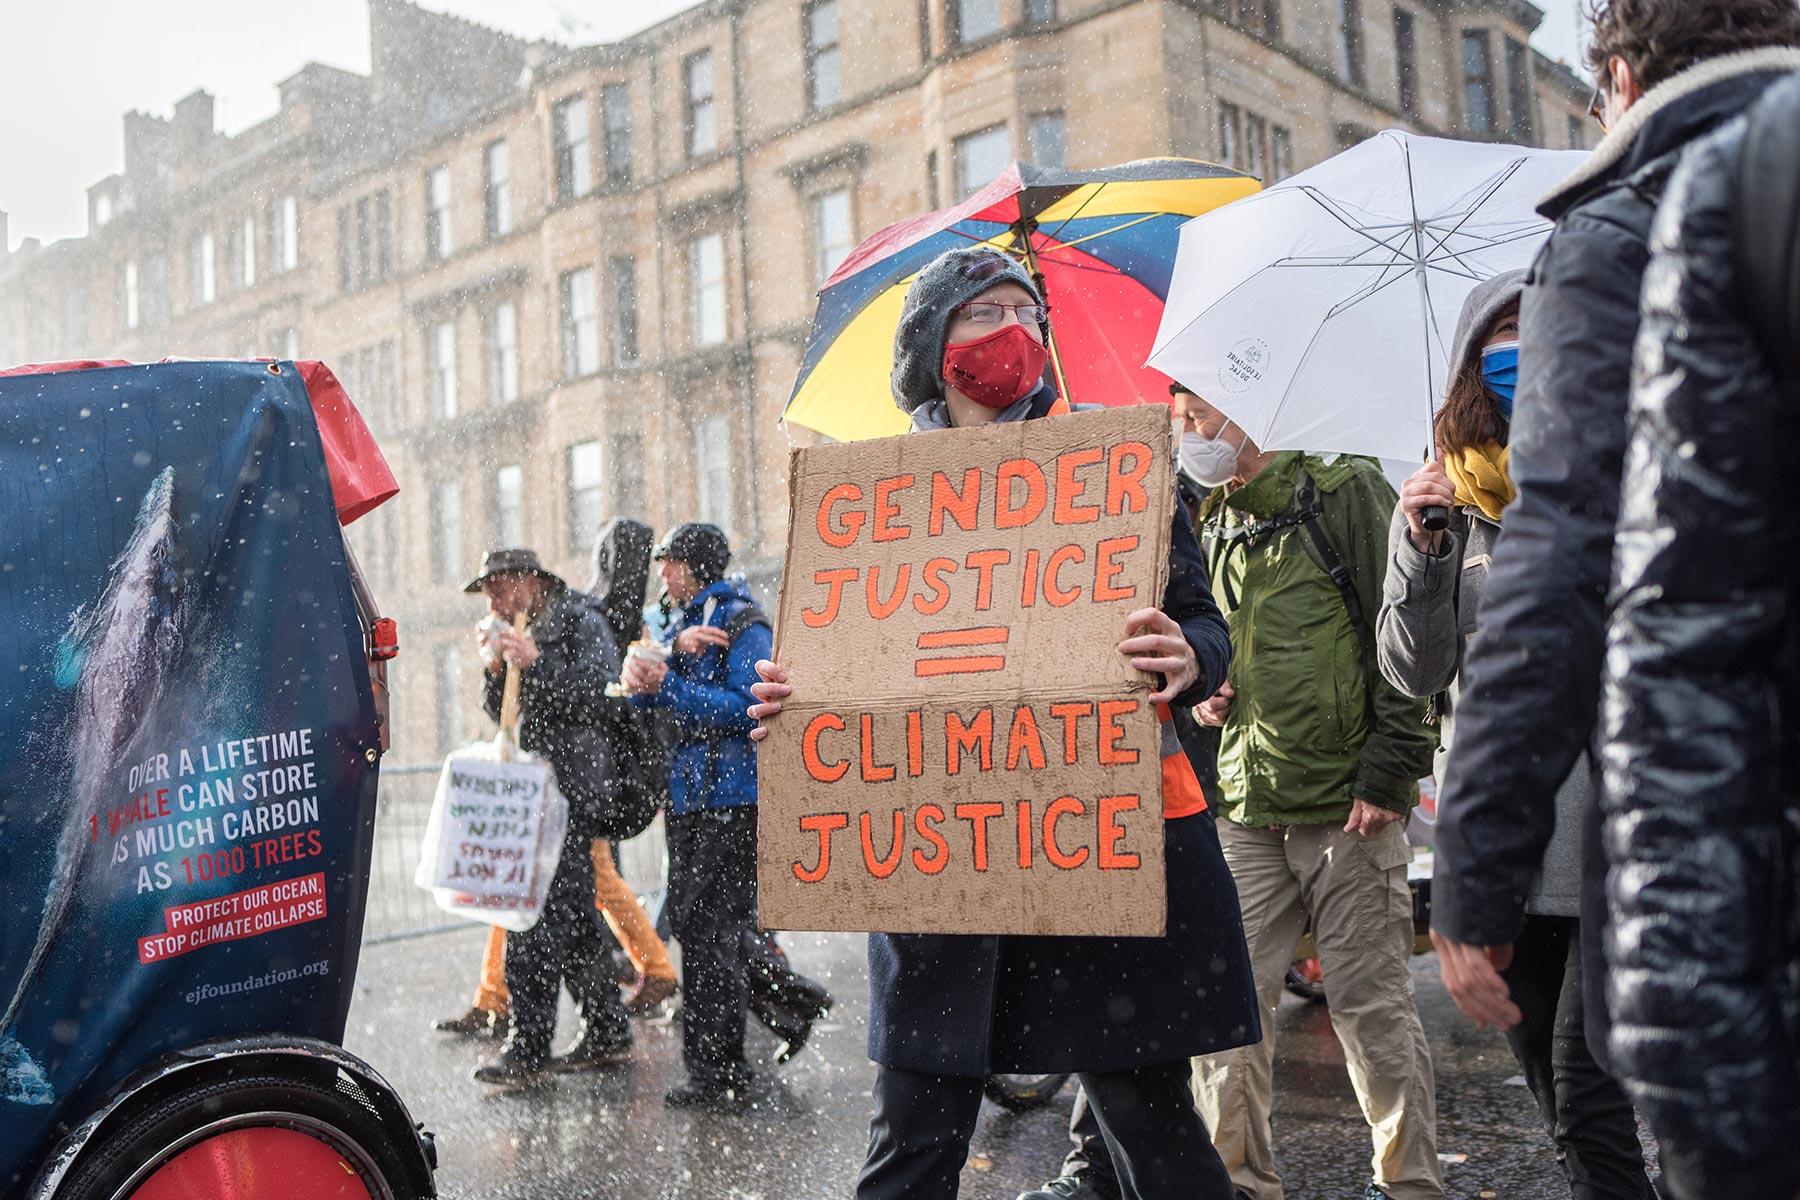 March for the climate during COP26 in Glasgow. Photo: LWF/Albin Hillert